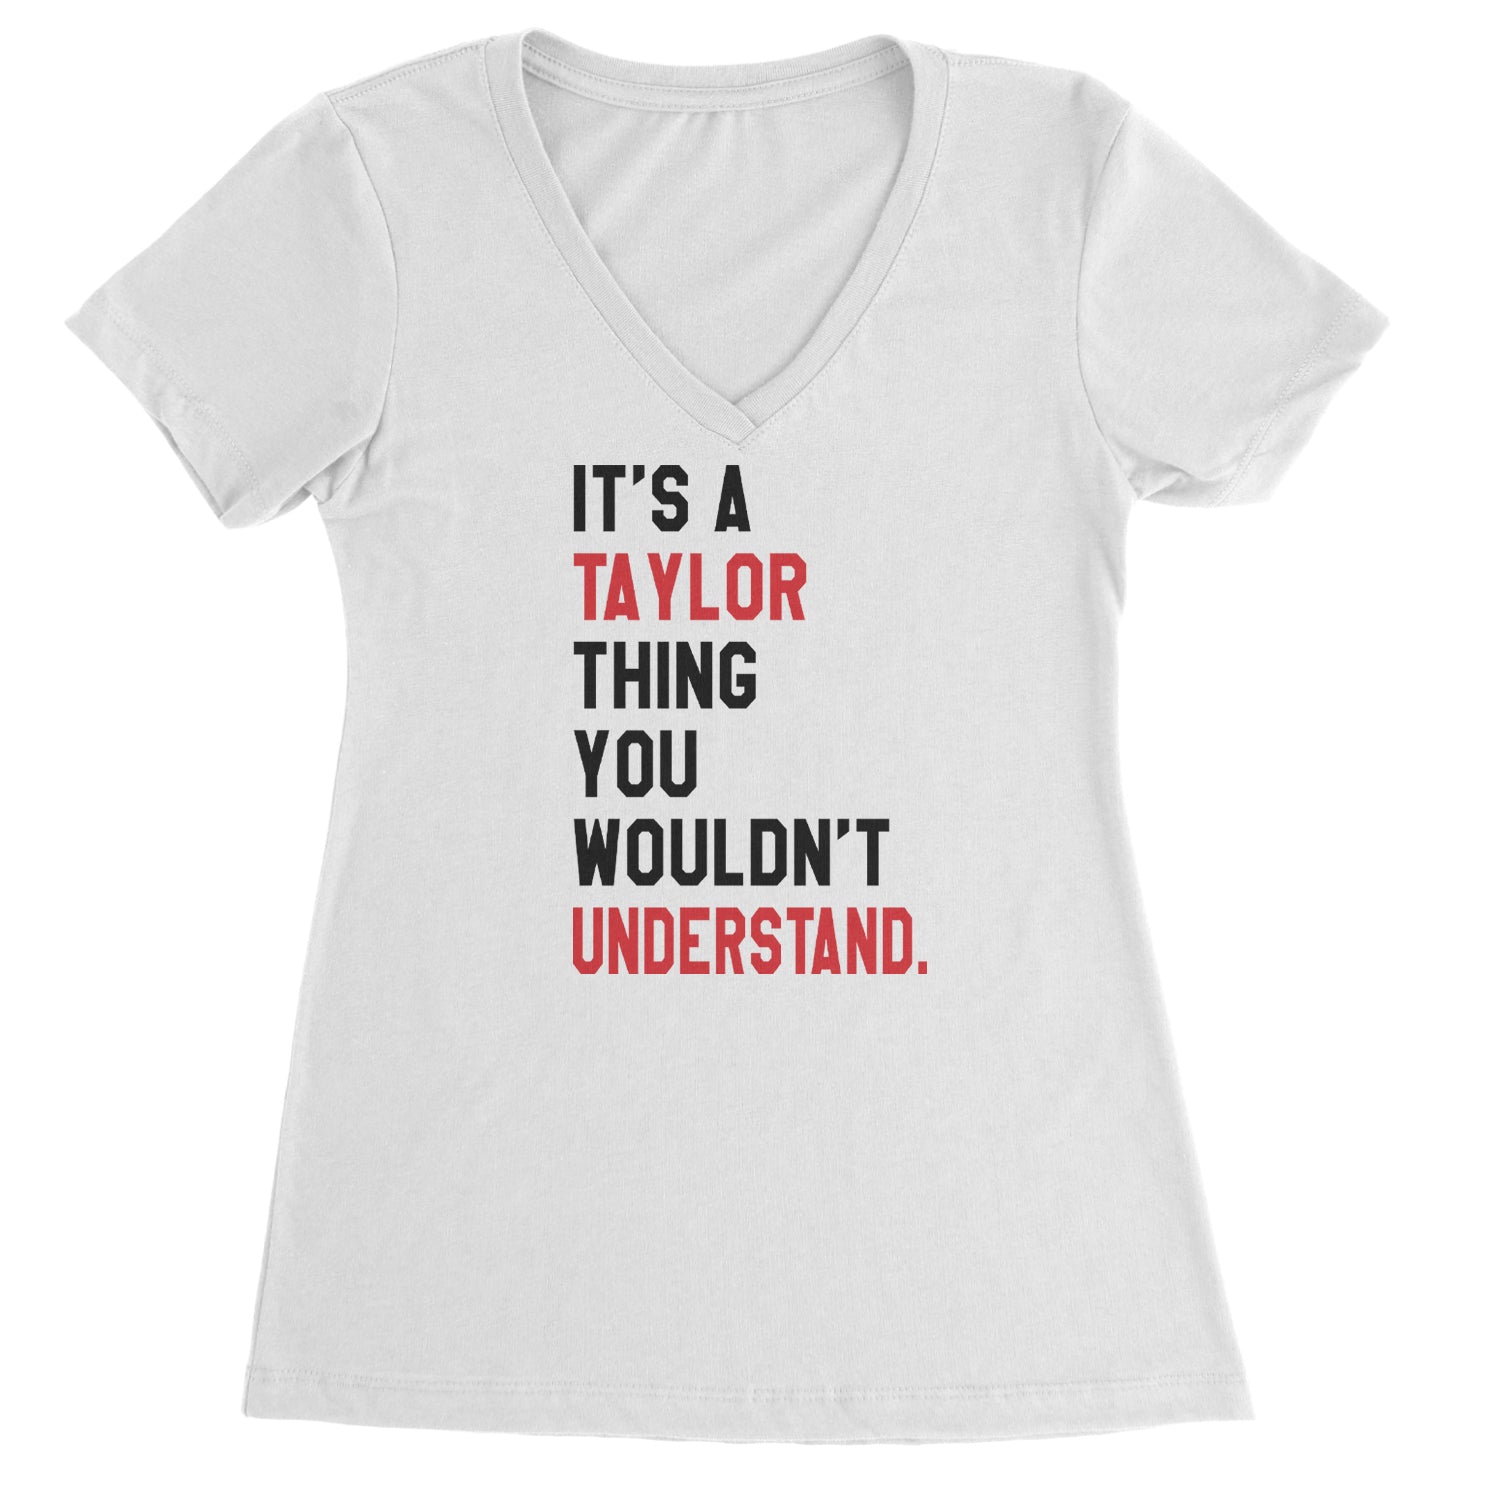 You Wouldn't Understand It's A Taylor Thing TTPD Ladies V-Neck T-shirt